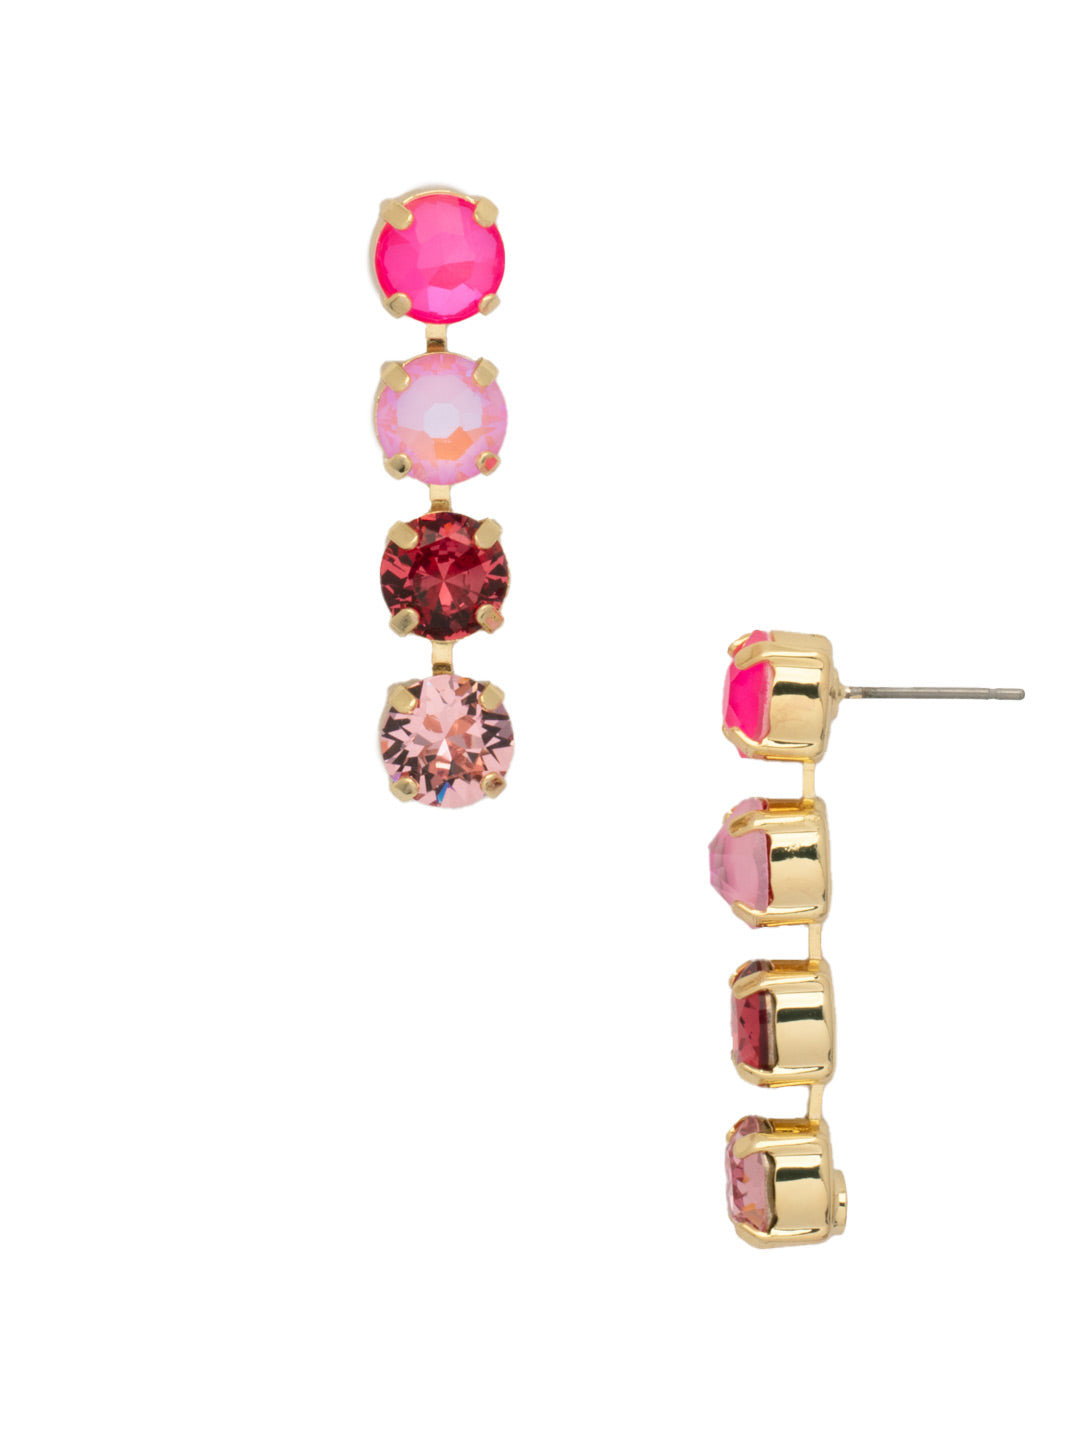 Matilda Dangle Earrings - EFH1BGBFL - <p>The Matilda Dangle Earrings feature a row of 4 round cut crystals on a post. From Sorrelli's Big Flirt collection in our Bright Gold-tone finish.</p>